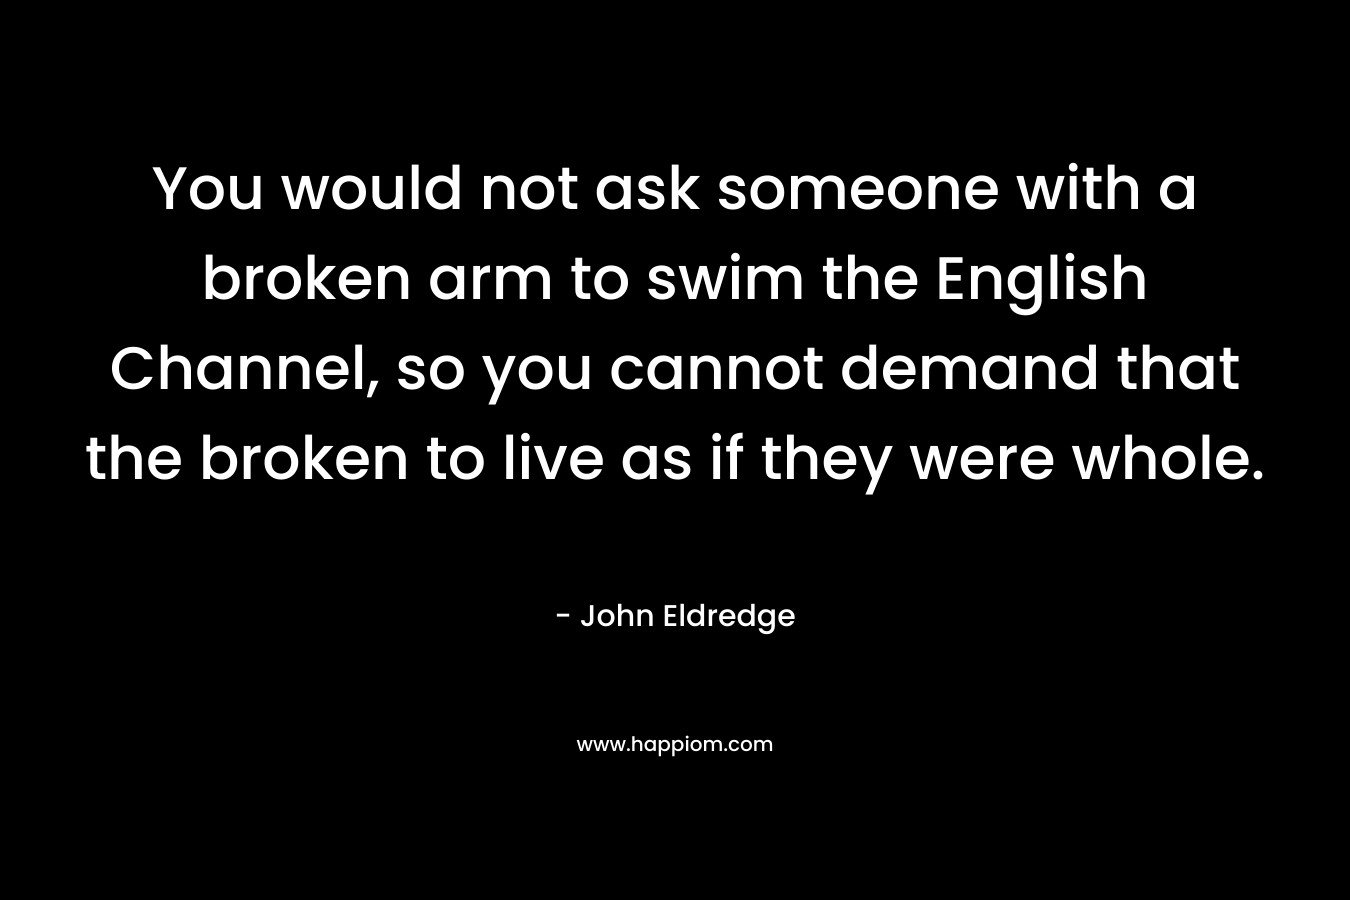 You would not ask someone with a broken arm to swim the English Channel, so you cannot demand that the broken to live as if they were whole.